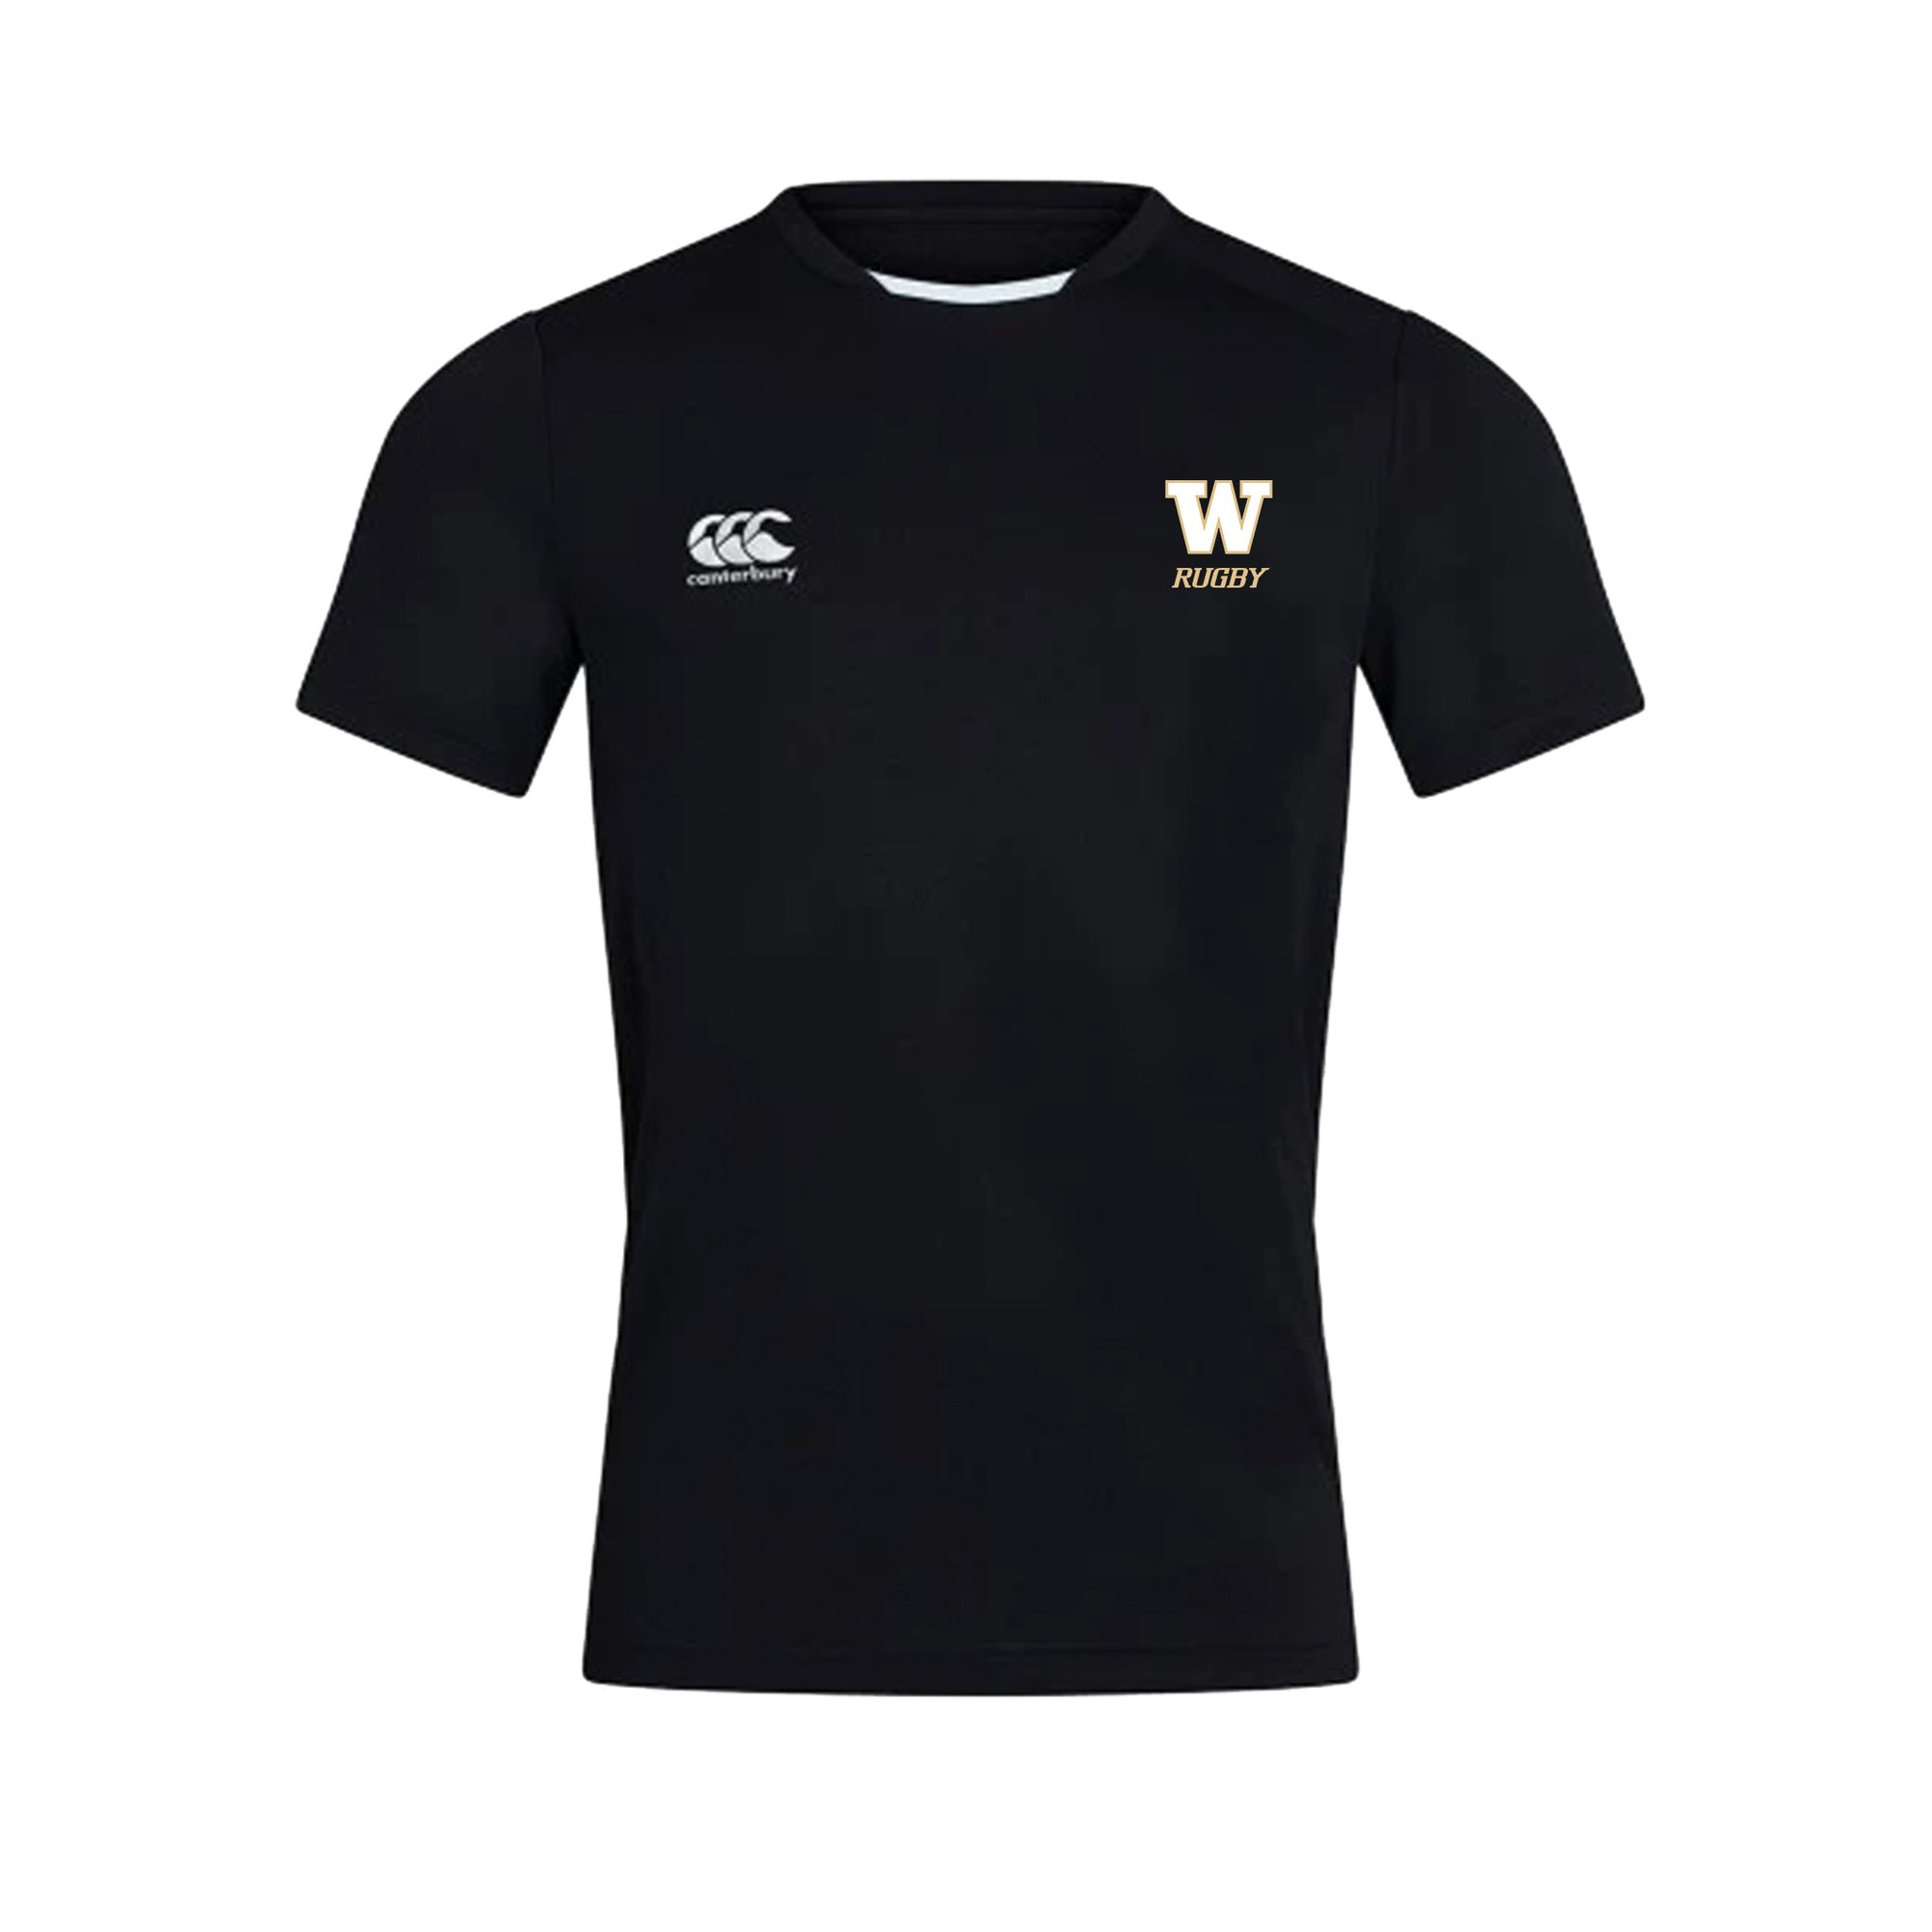 UW Women's Huskies Rugby Club Canterbury Club Dry T-Shirt - Mens - Black - The Rugby Shop The Rugby Shop Mens / BLACK / XS TRS Distribution Canada T-SHIRT UW Women's Huskies Rugby Club Canterbury Club Dry T-Shirt - Mens - Black